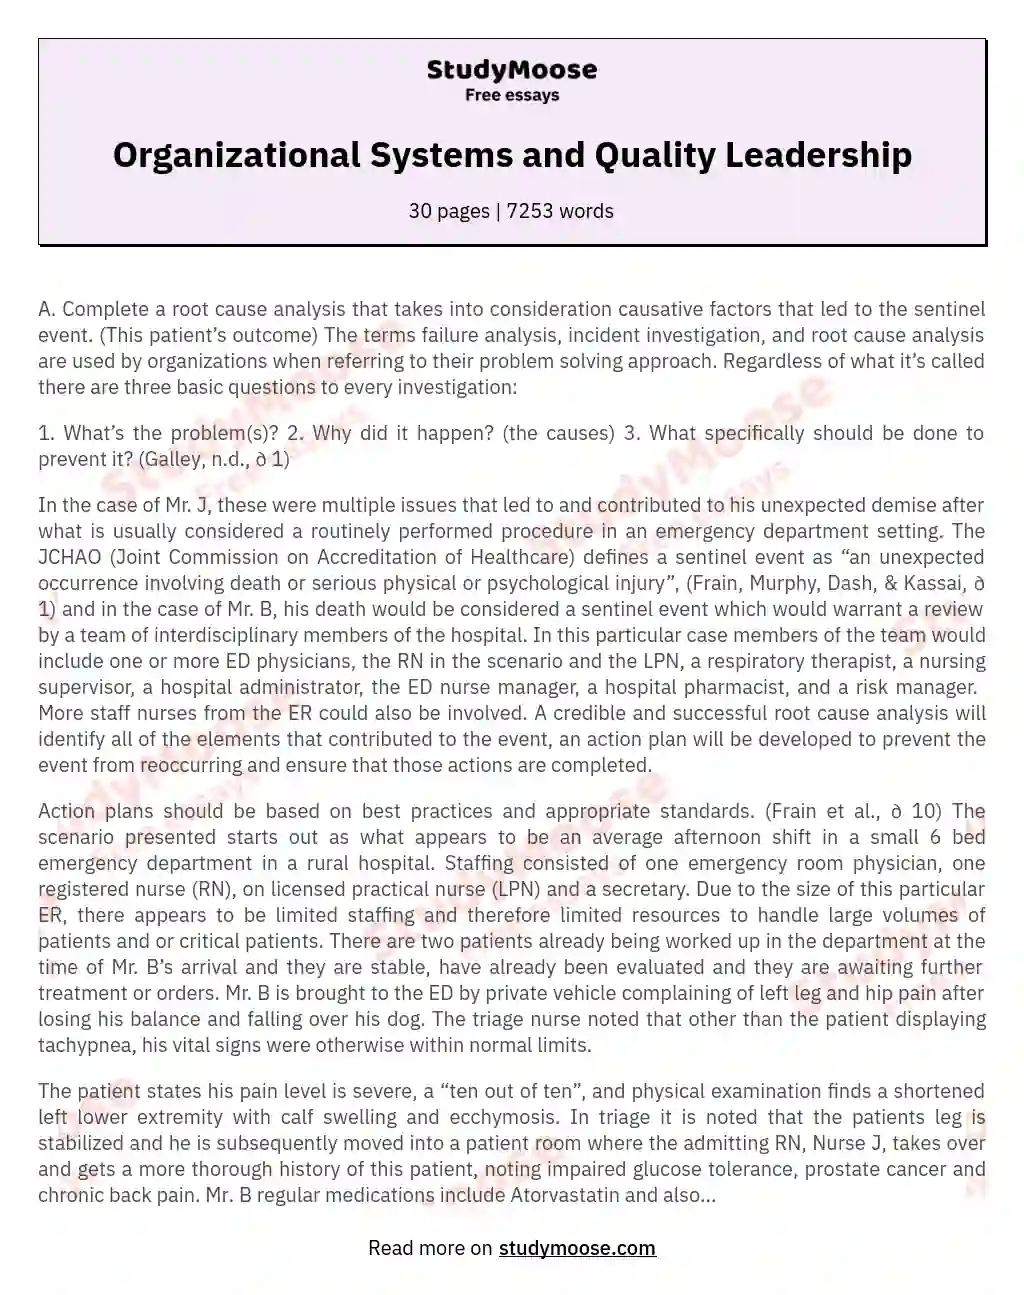 Organizational Systems and Quality Leadership essay